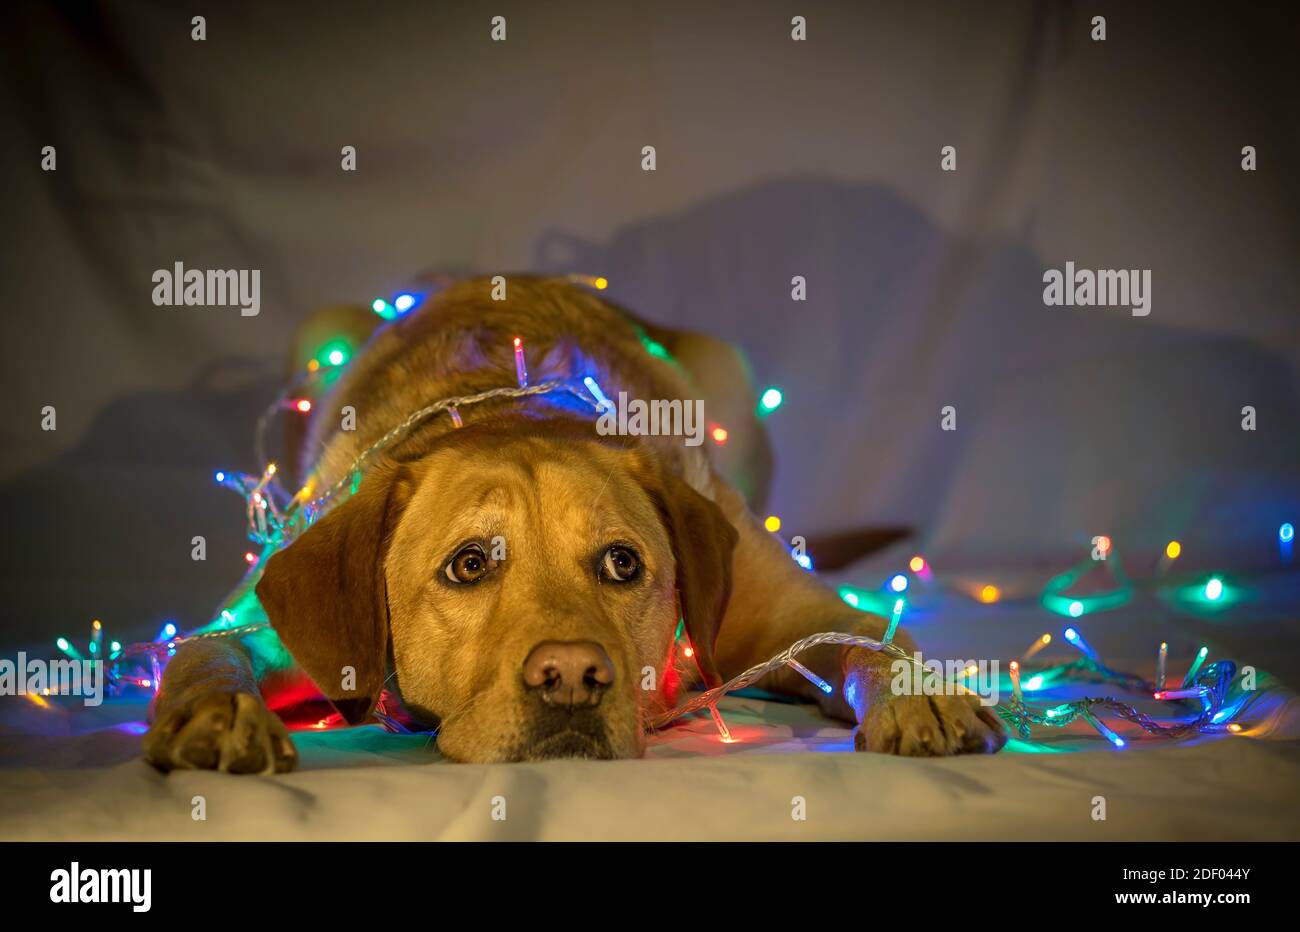 An unhappy, scared dog labrador retriever posing with colorful Christmas lights wrapped aroung her. Stock Photo